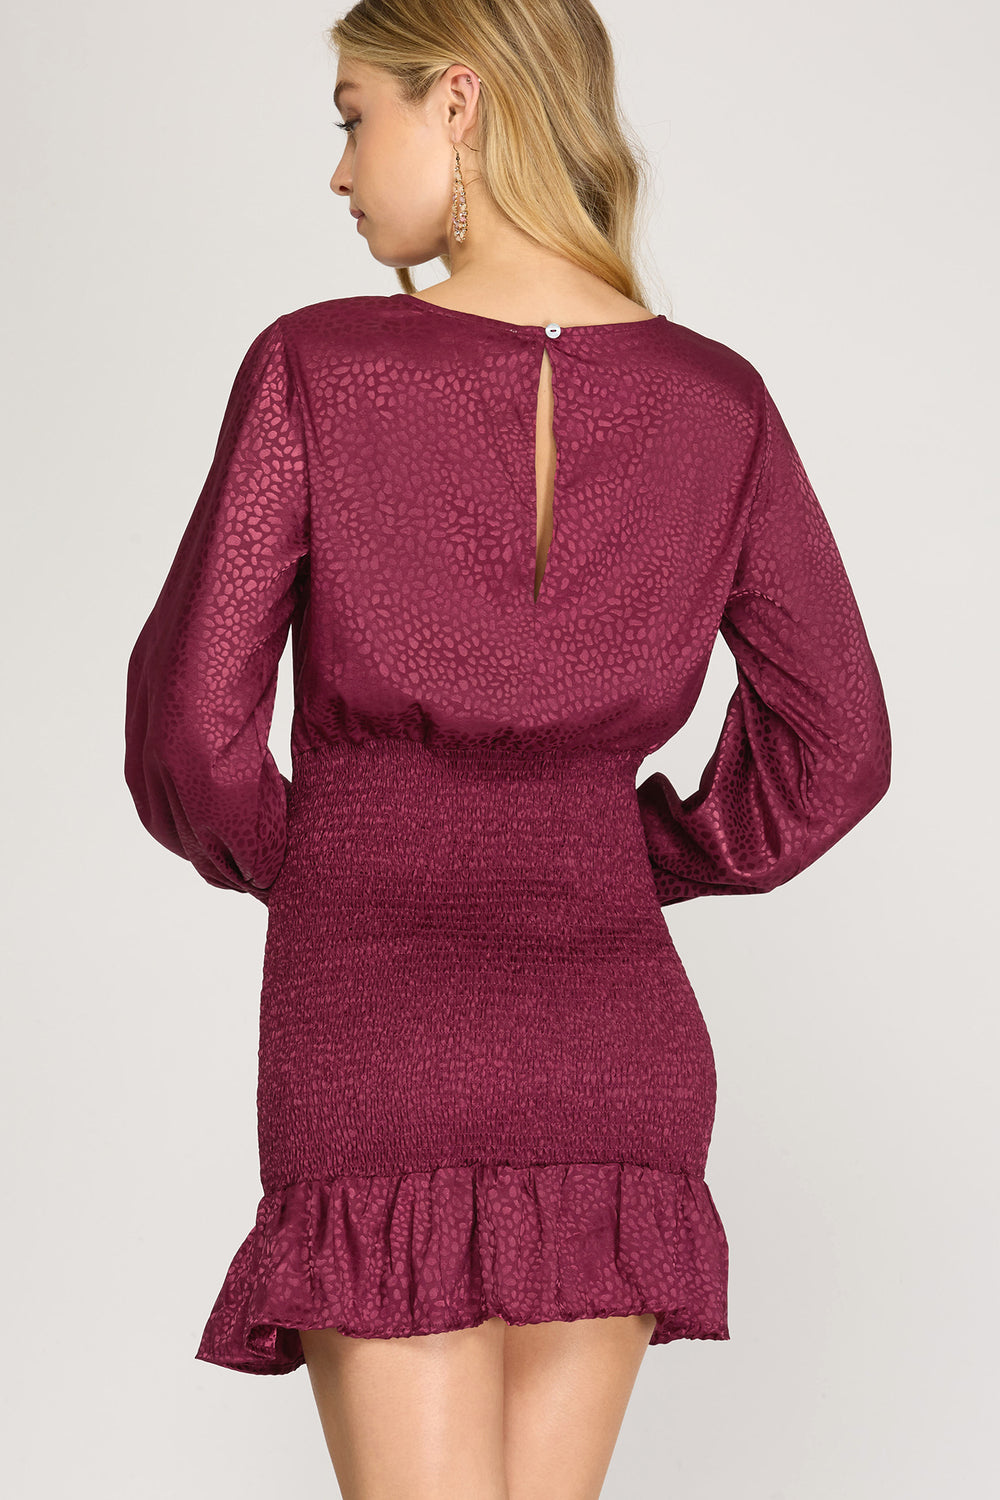 Hadley Jacquard Satin Smocked Dress, Wine-Dresses-Inspired by Justeen-Women's Clothing Boutique in Chicago, Illinois